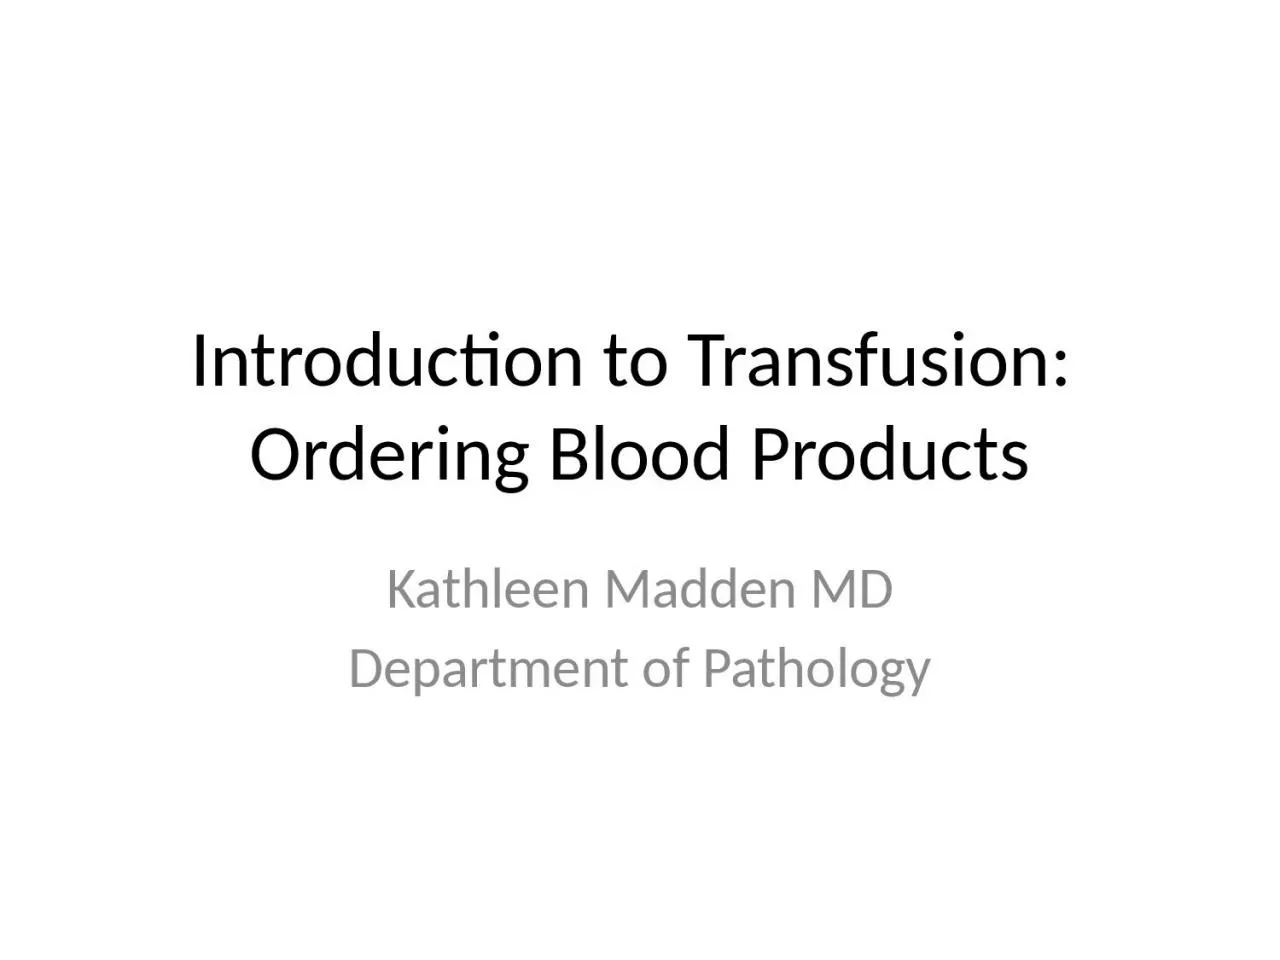 Introduction to Transfusion: